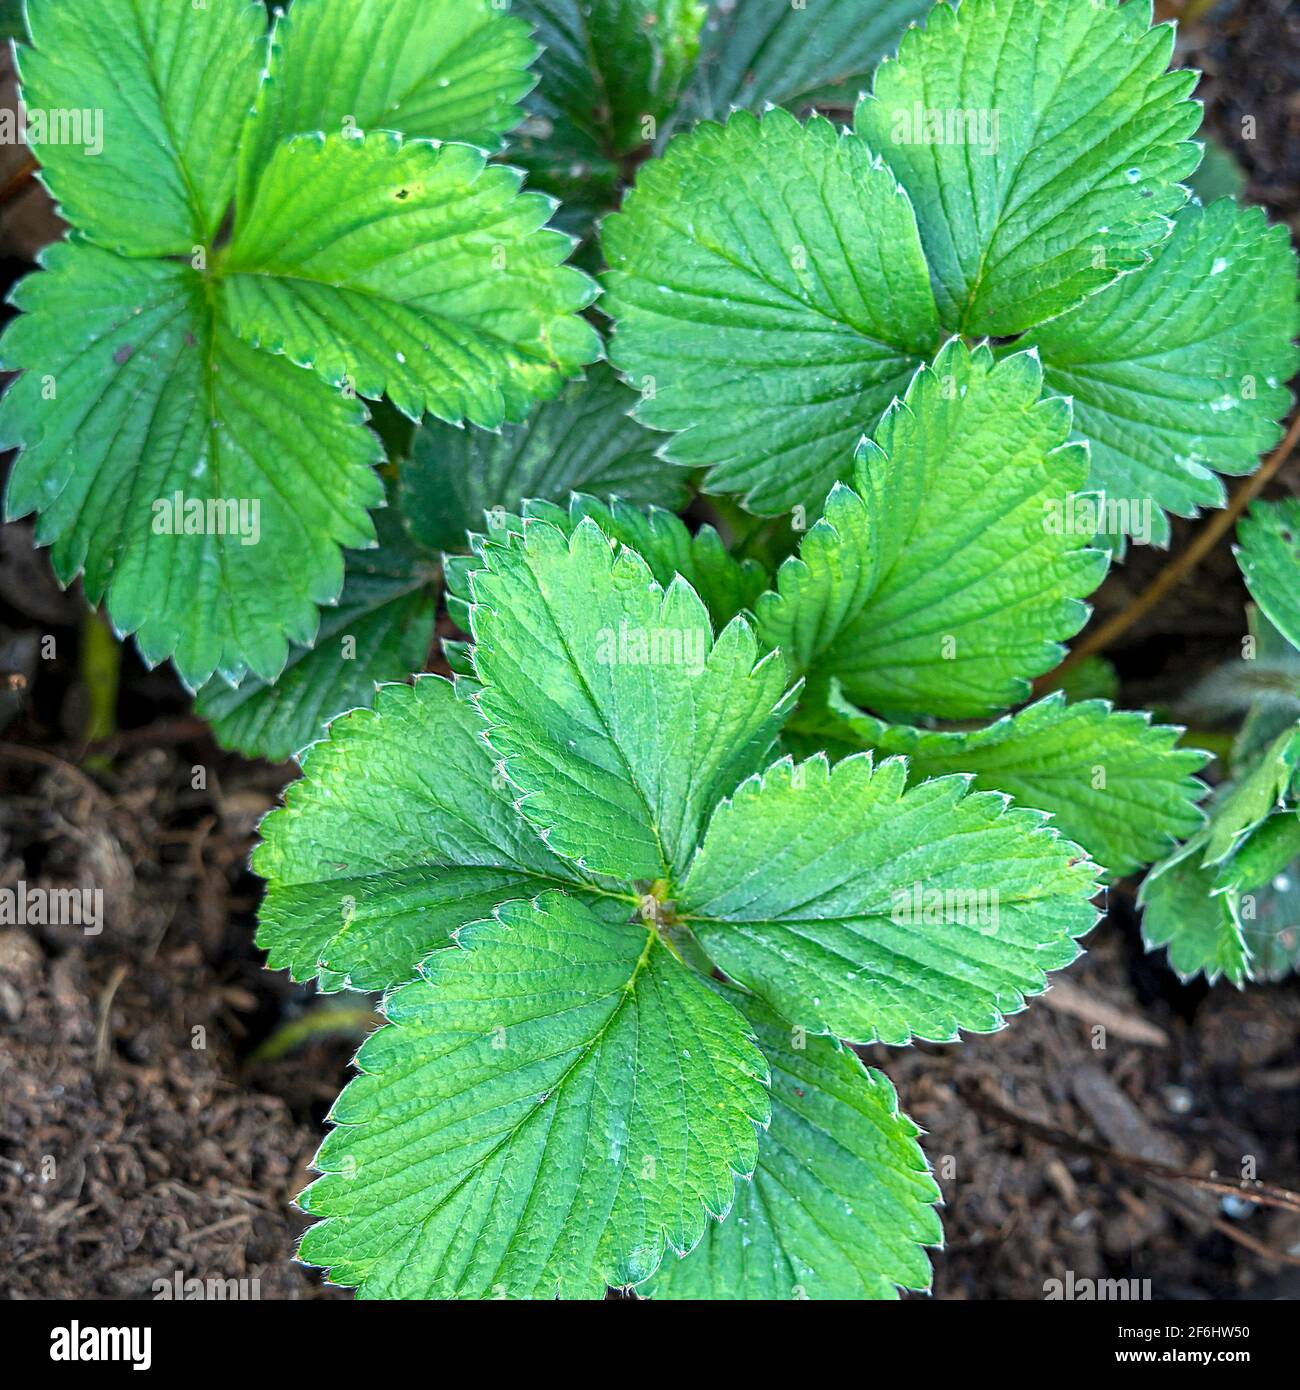 Fresh green leaves on a strawberry plant Stock Photo